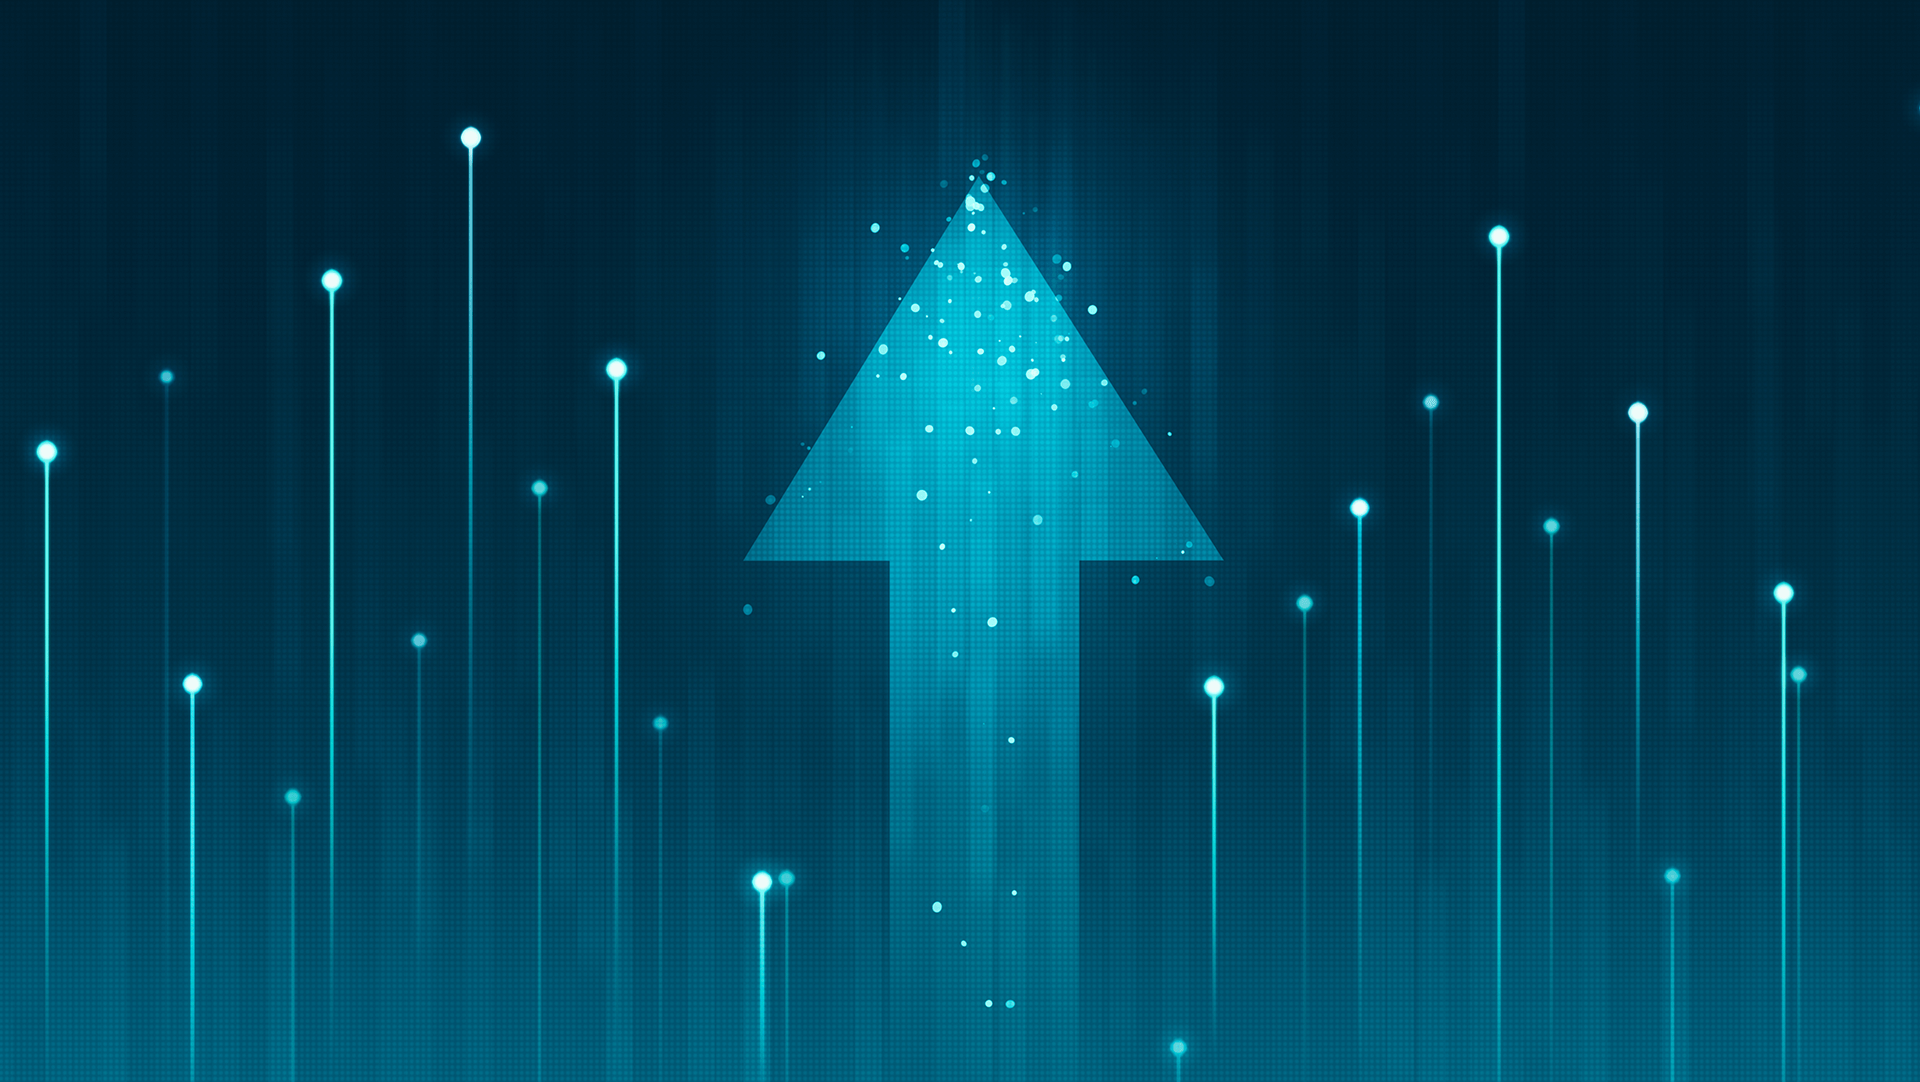 Digital growth concept with a glowing upward arrow and dynamic lines on a blue abstract background.